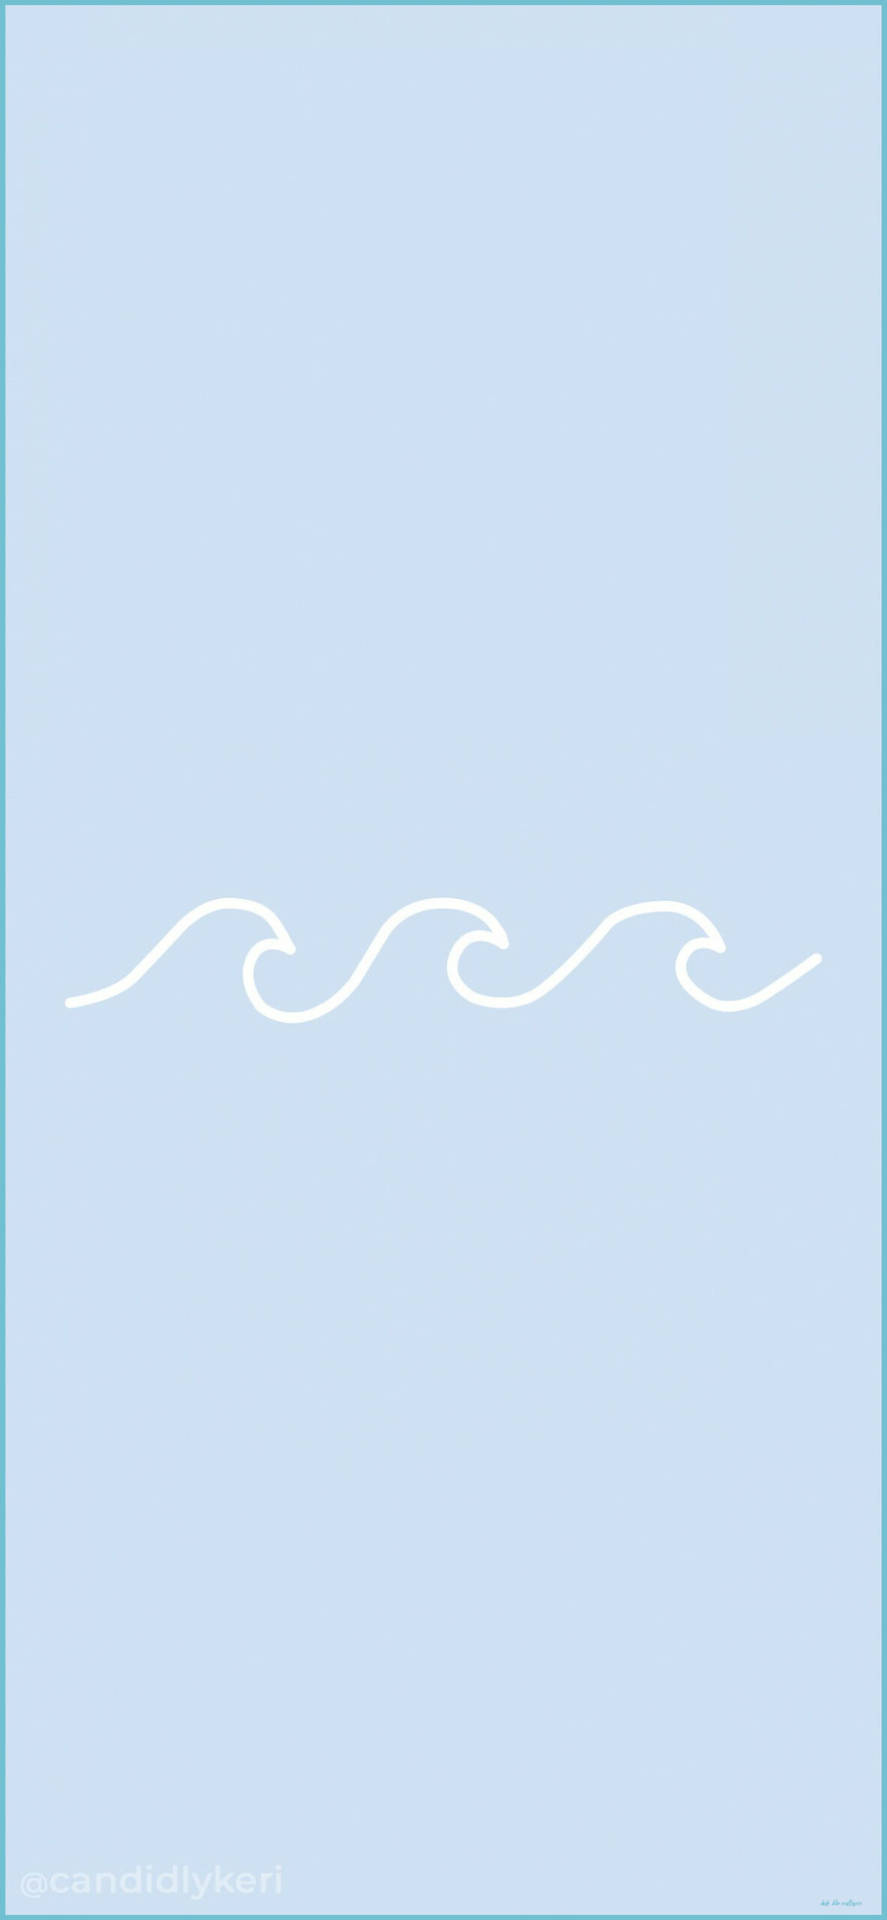 "Experience Serenity with Dreamy Pastel Blue Aesthetic Line Art Waves" Wallpaper